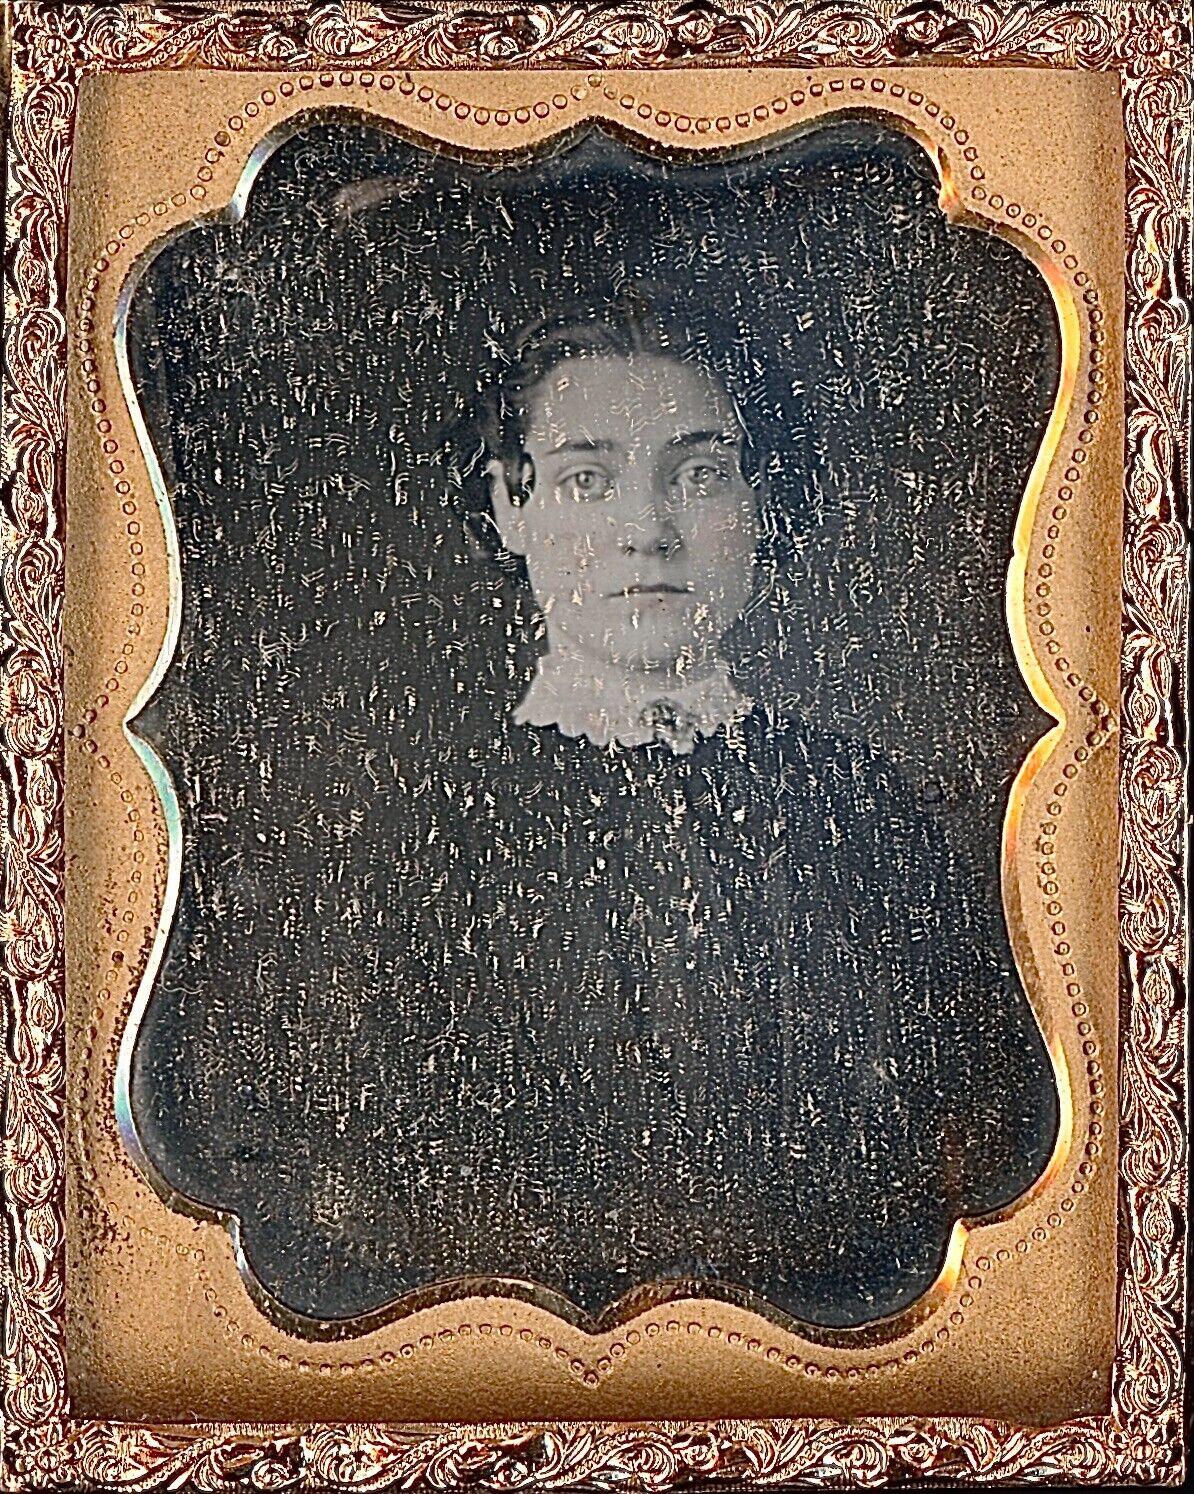 Pretty Light Eyed Young Lady With Tinted Face 1/9 Plate Daguerreotype T559